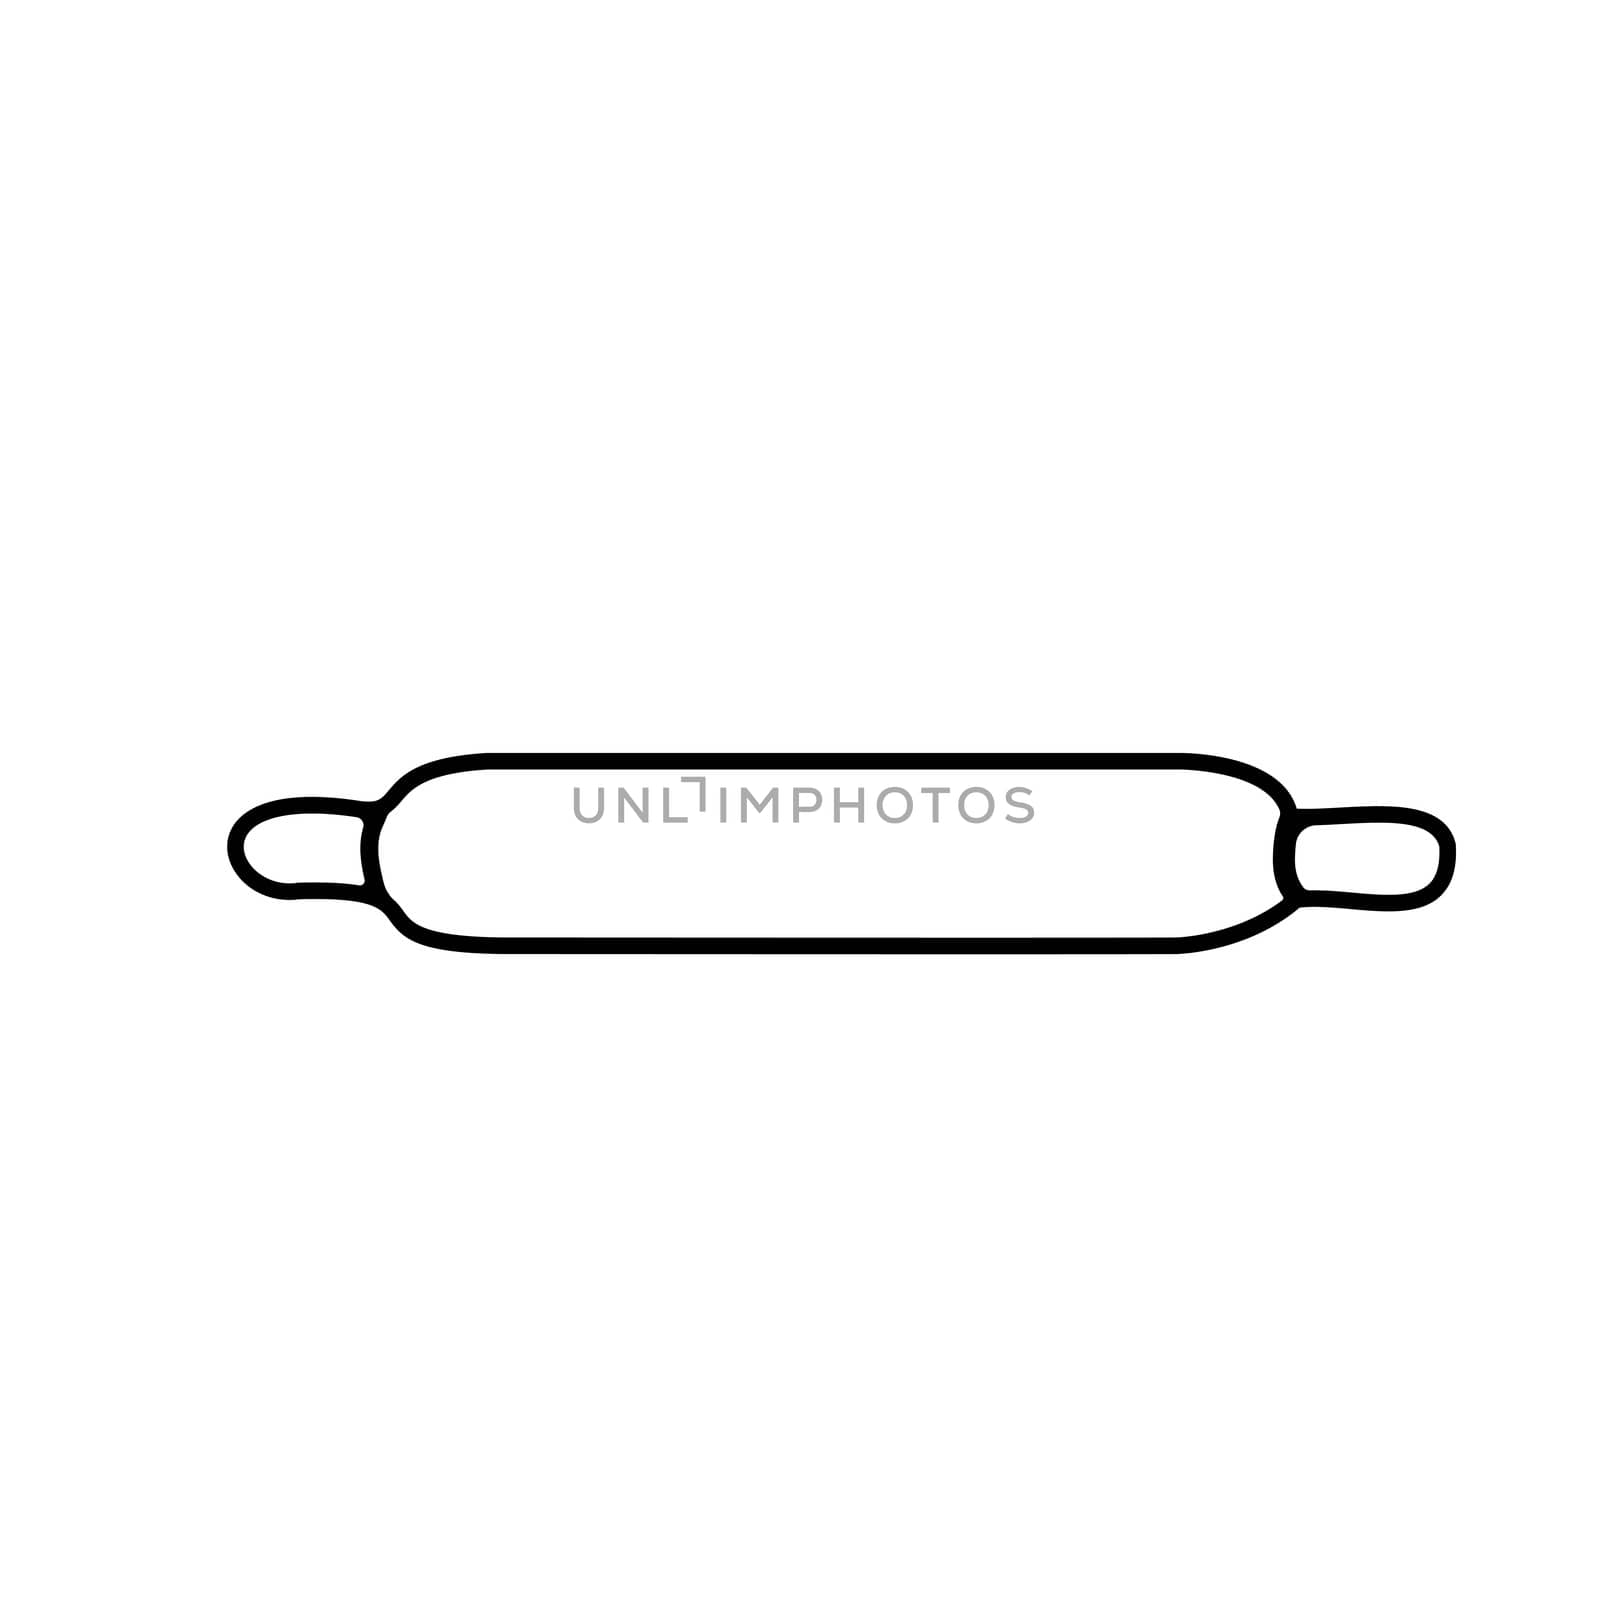 Rolling pin, hand drawn doodle sketch, sign and symbols black and white illustration